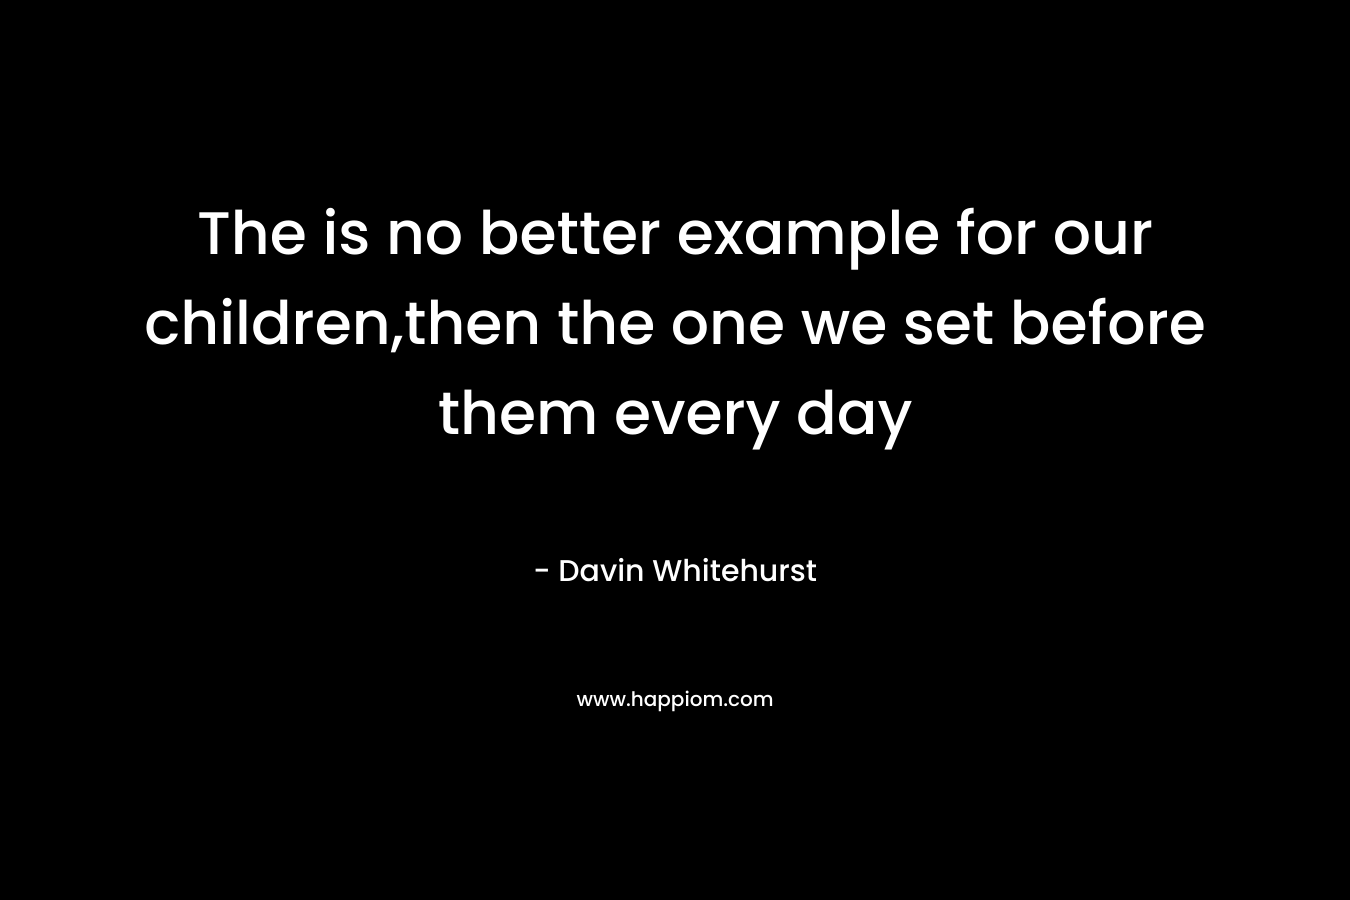 The is no better example for our children,then the one we set before them every day – Davin Whitehurst